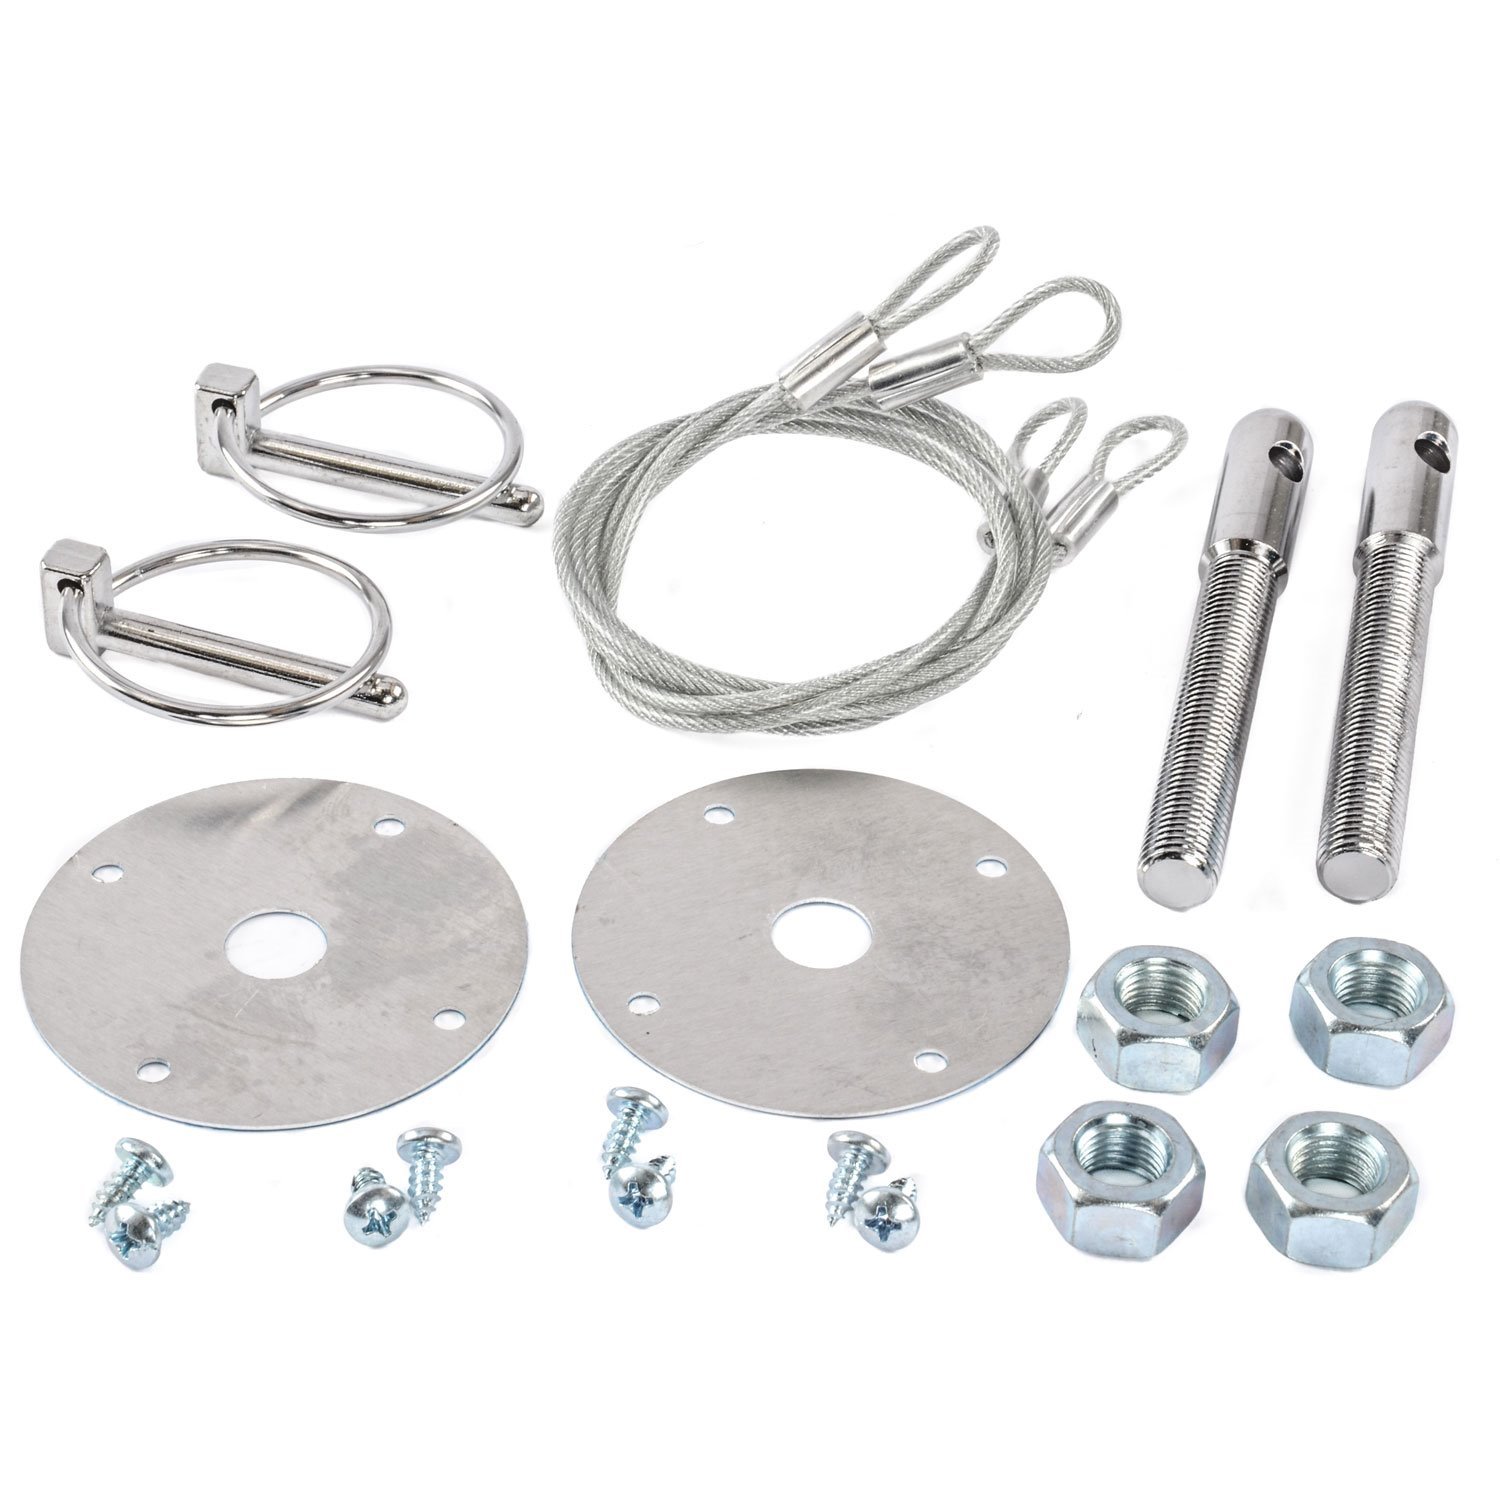 Super Stock Hood Pin Kit with Torsion Clips Chrome Plated Scuff Plates